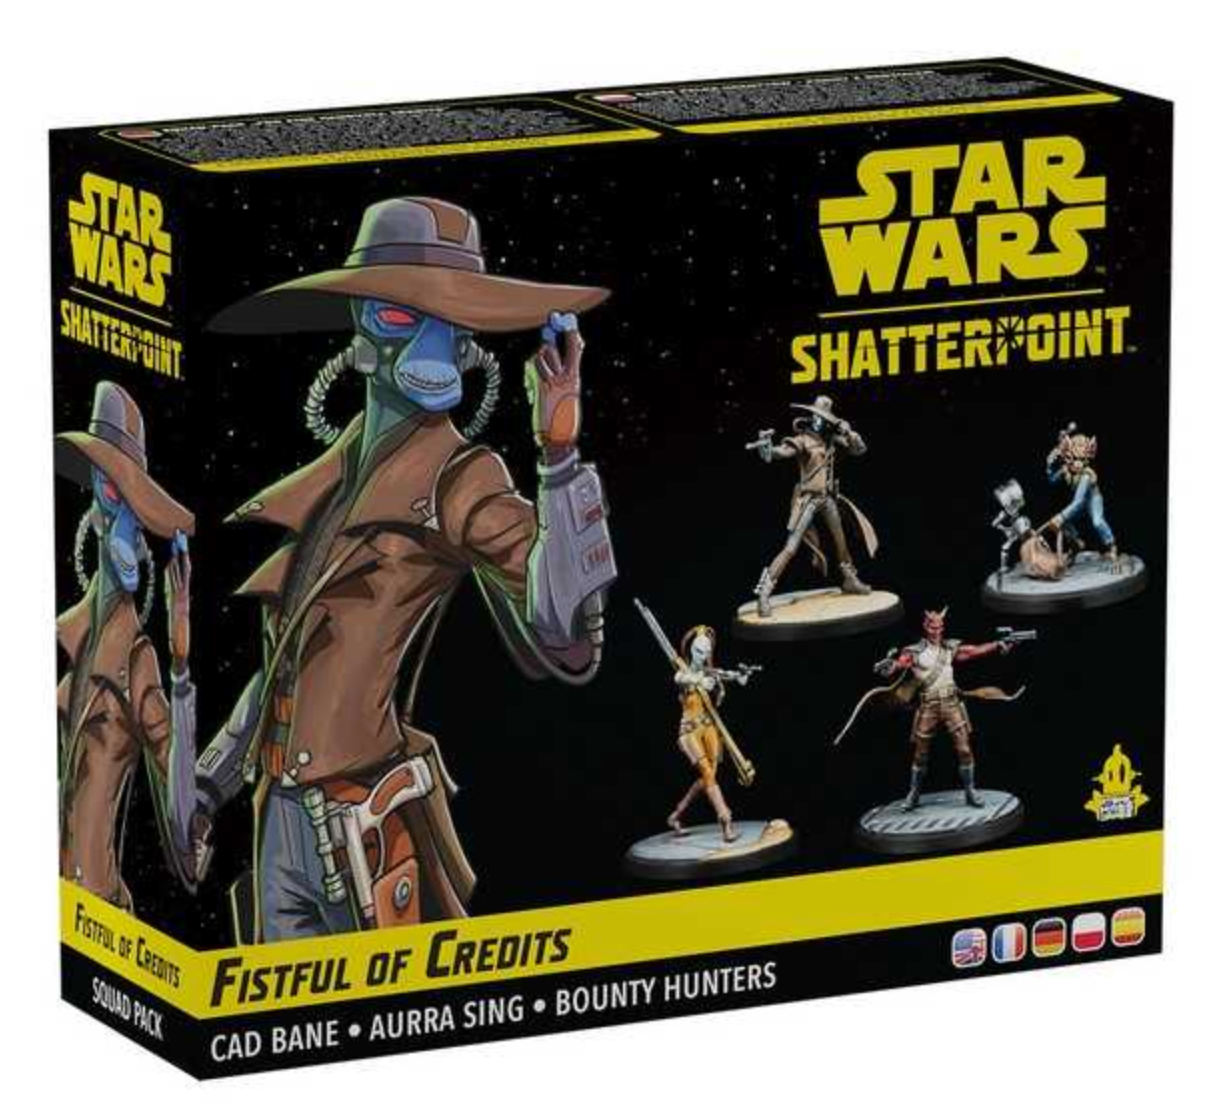 Star Wars Shatterpoint: Fistful of Credits (Cad Bane Squad Pack)